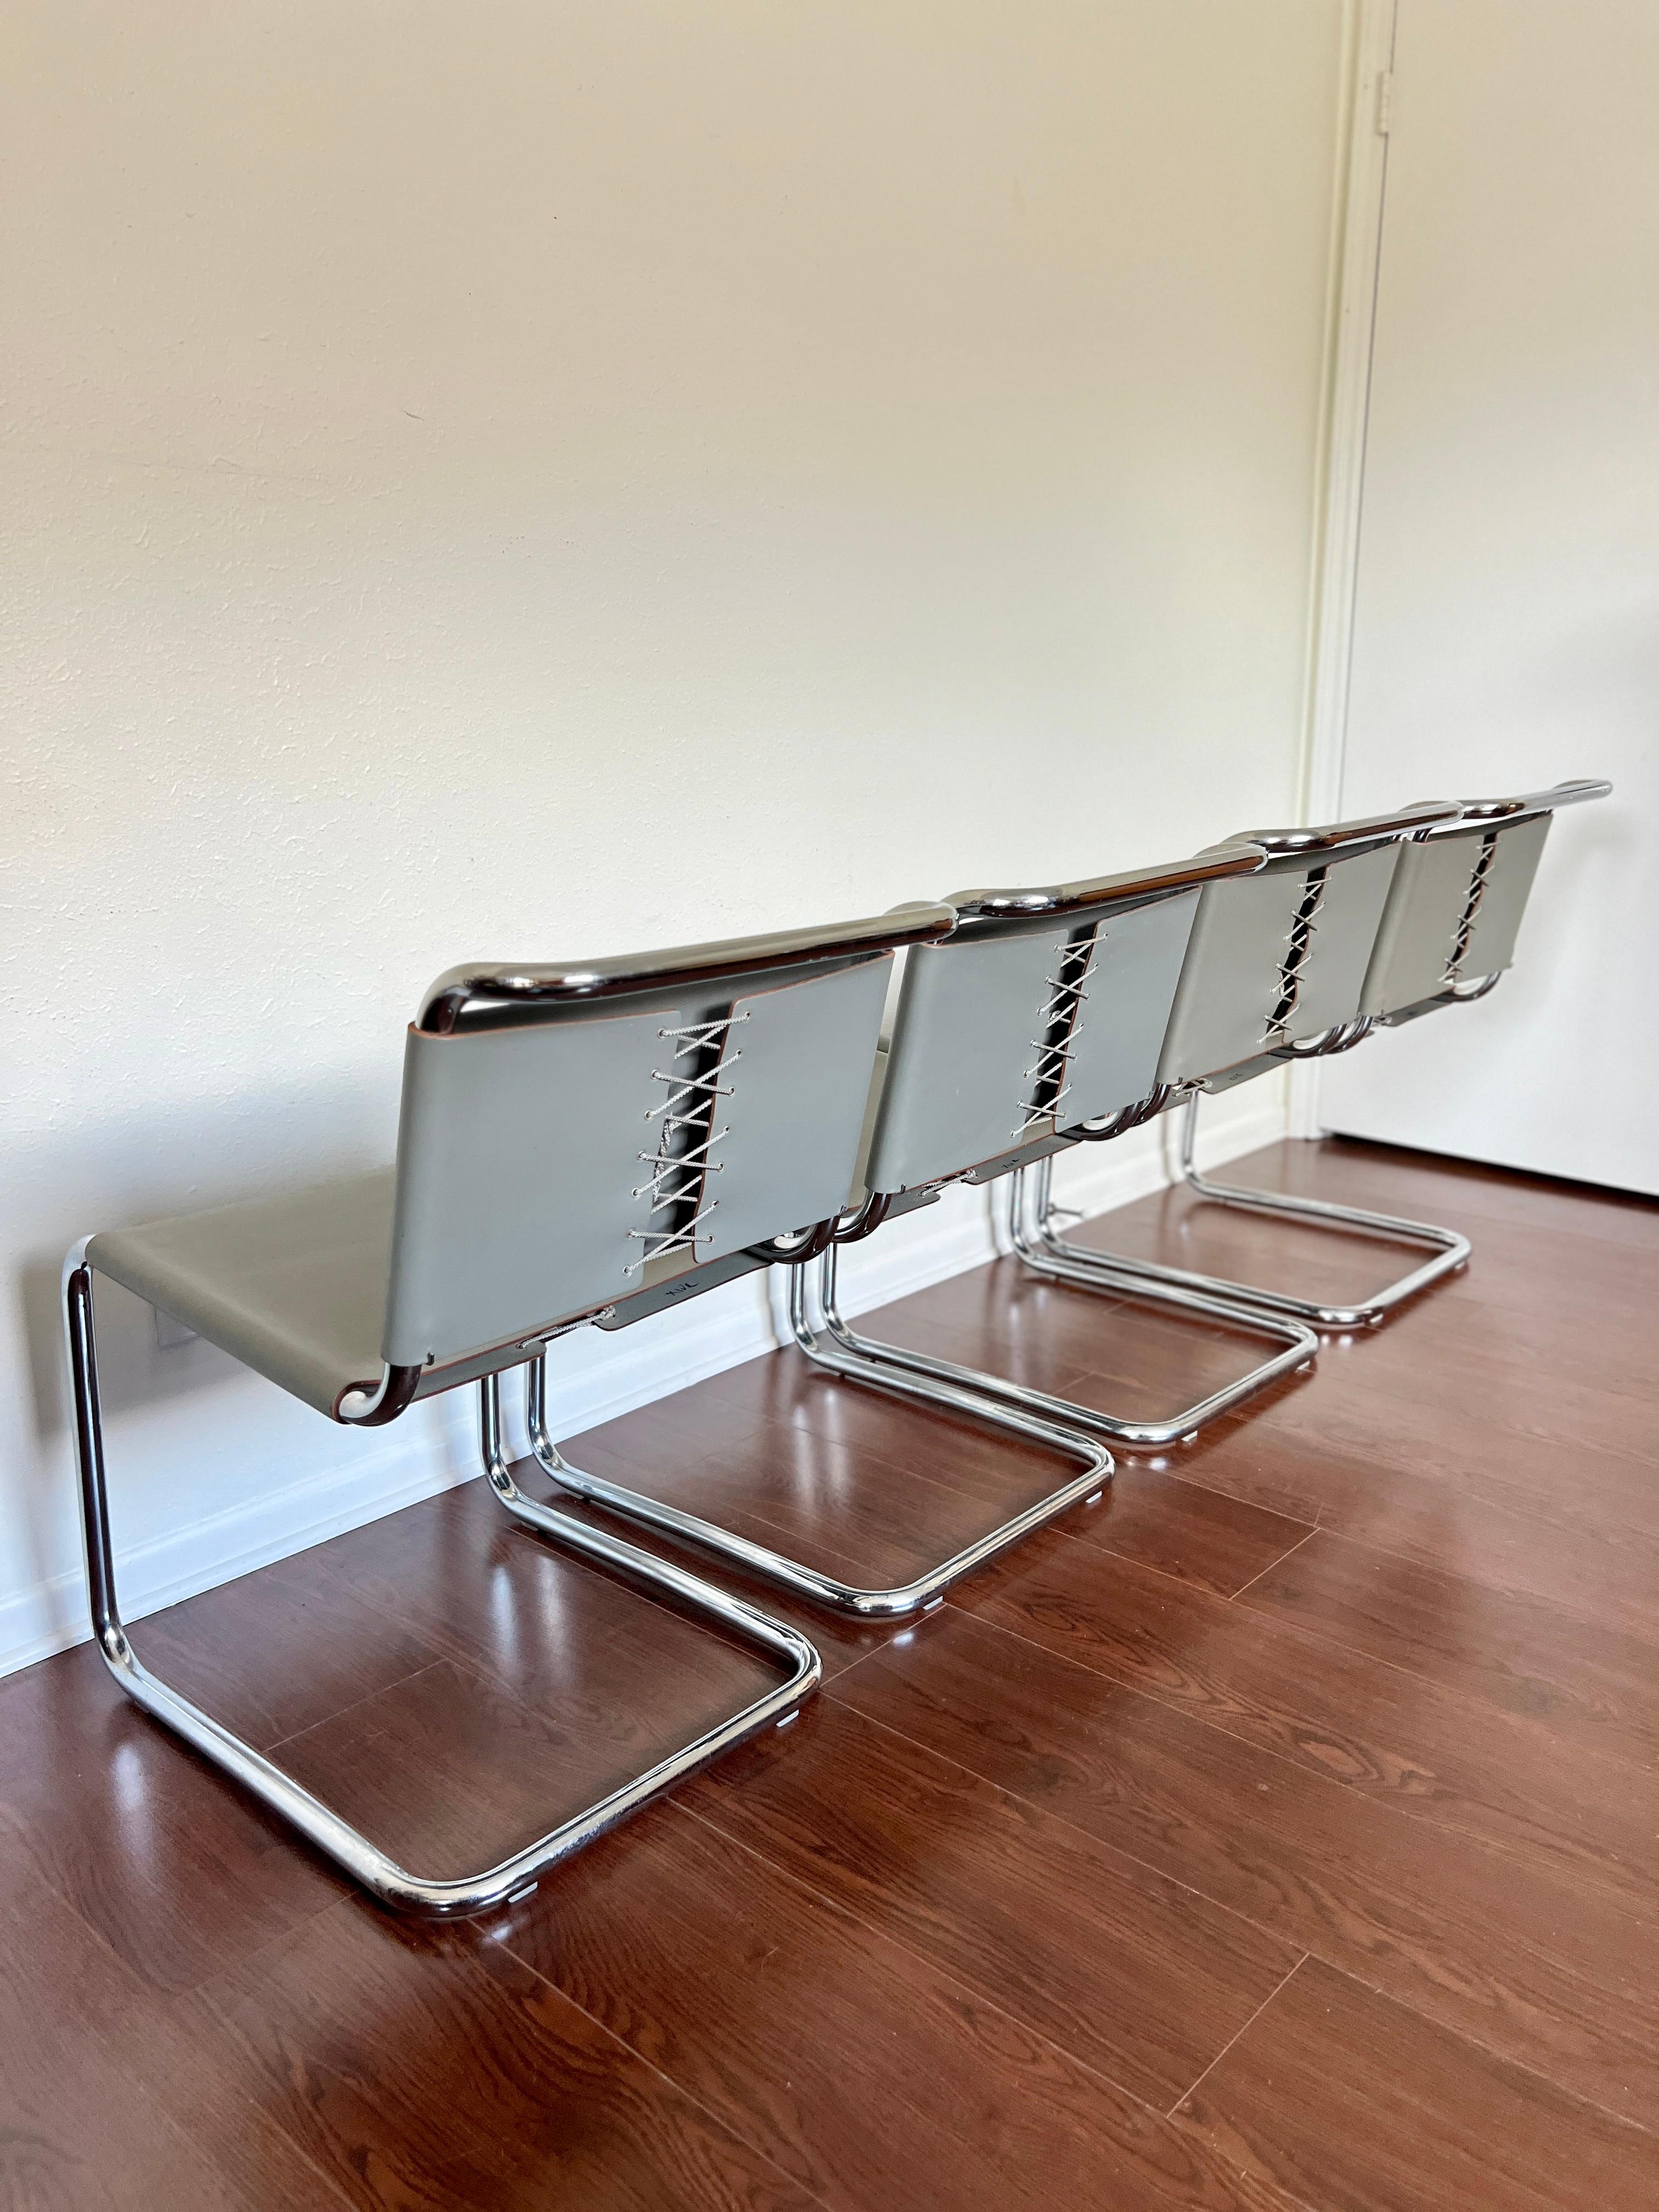 Set of 4 Gray Leather Spoleto B33 Chairs by Marcel Breuer for Knoll For Sale 10